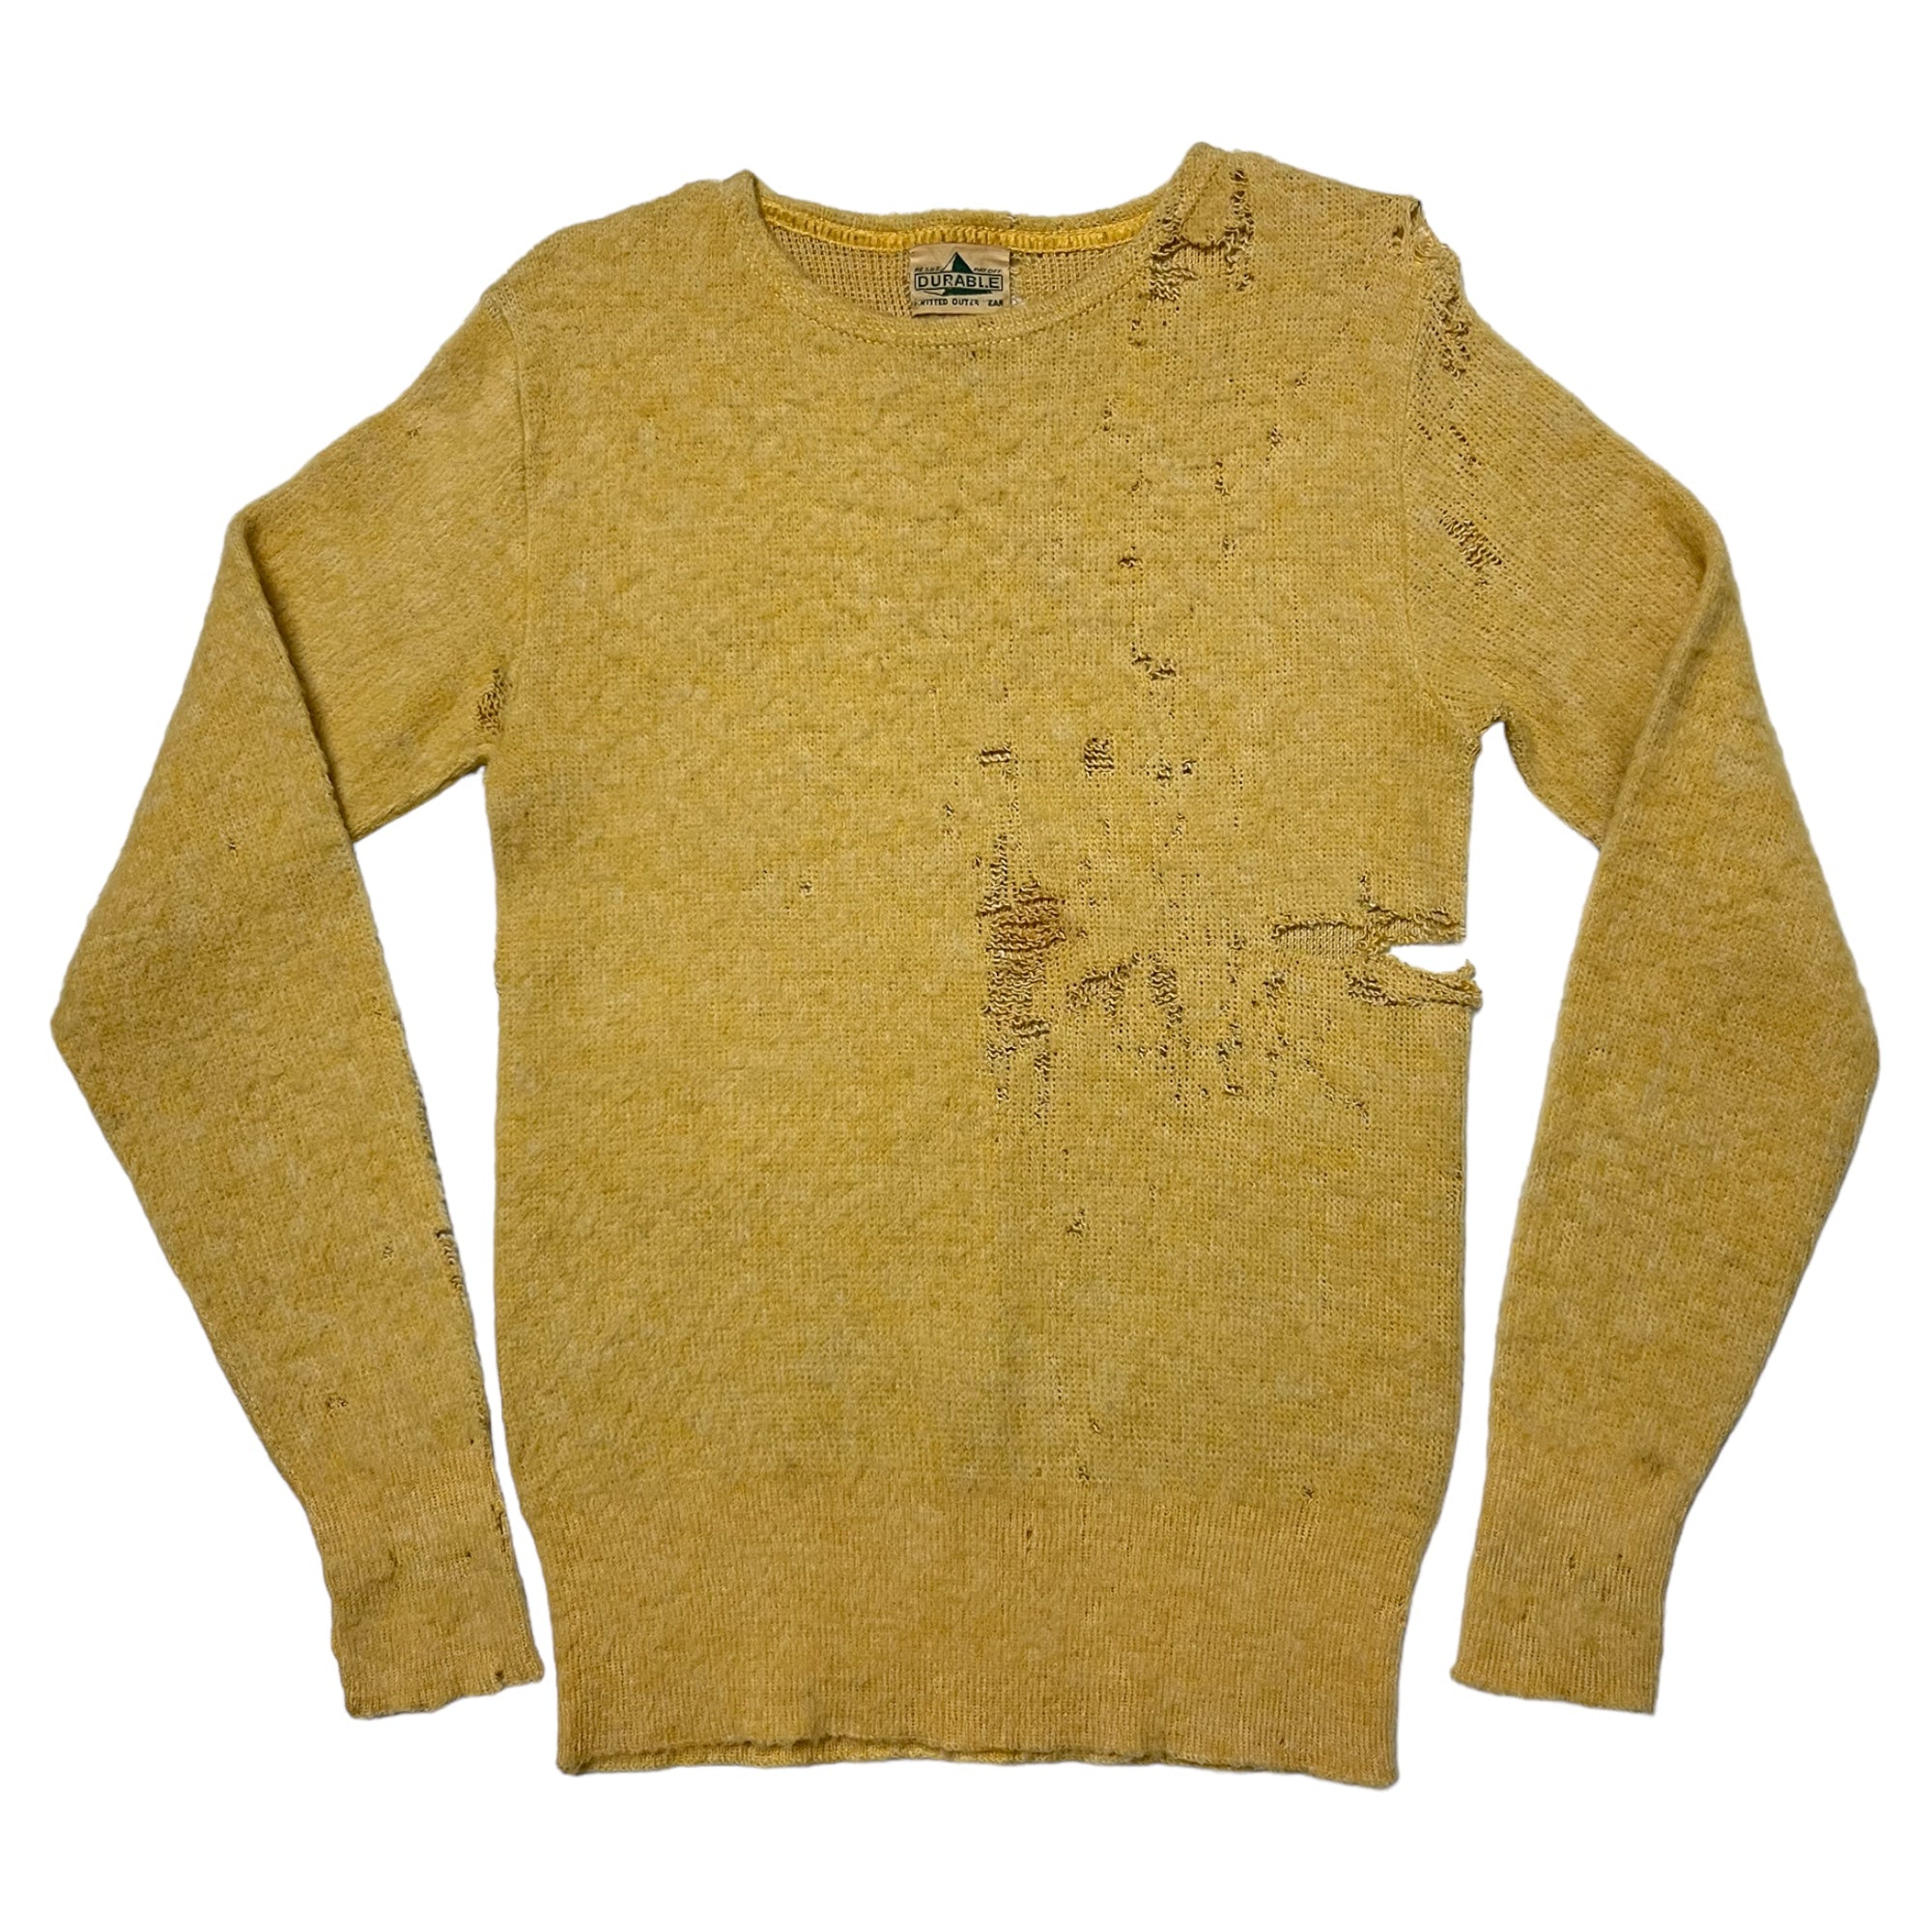 1950s Distressed ‘Durable’ Brand Knit Sweater Top - Fields of Gold/Tan - S/M